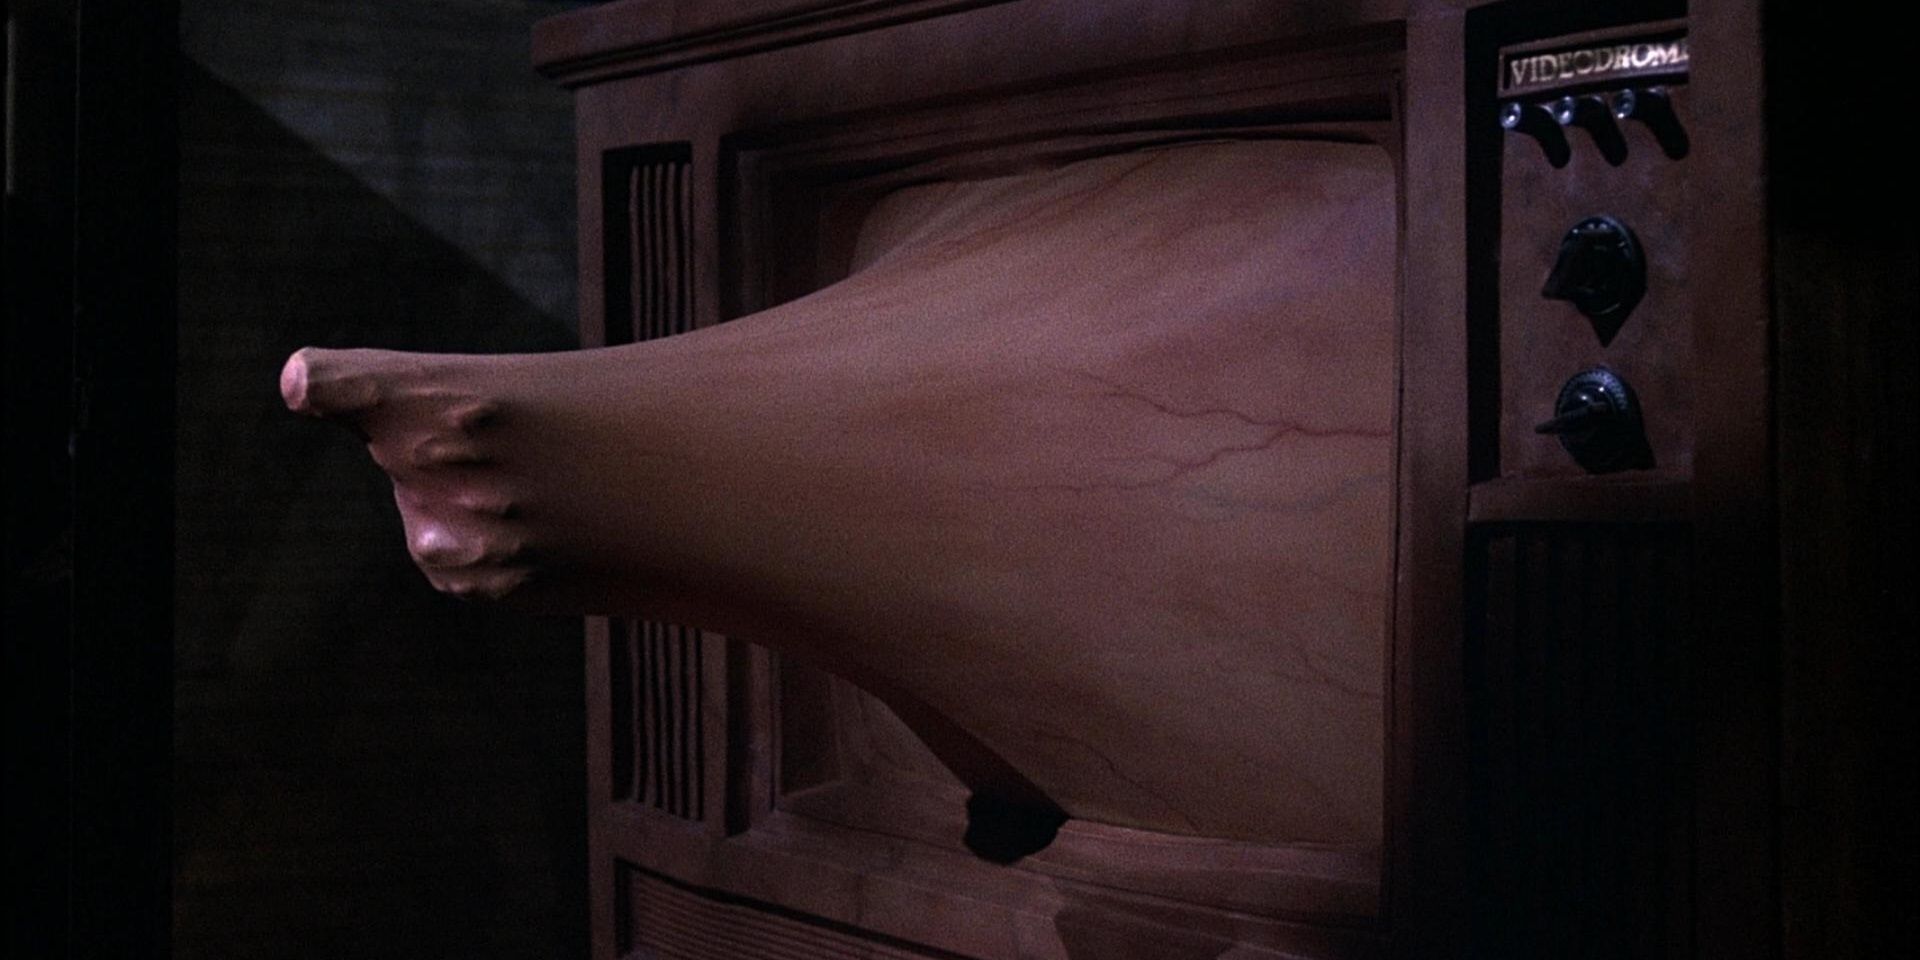 A TV comes to life in Videodrome